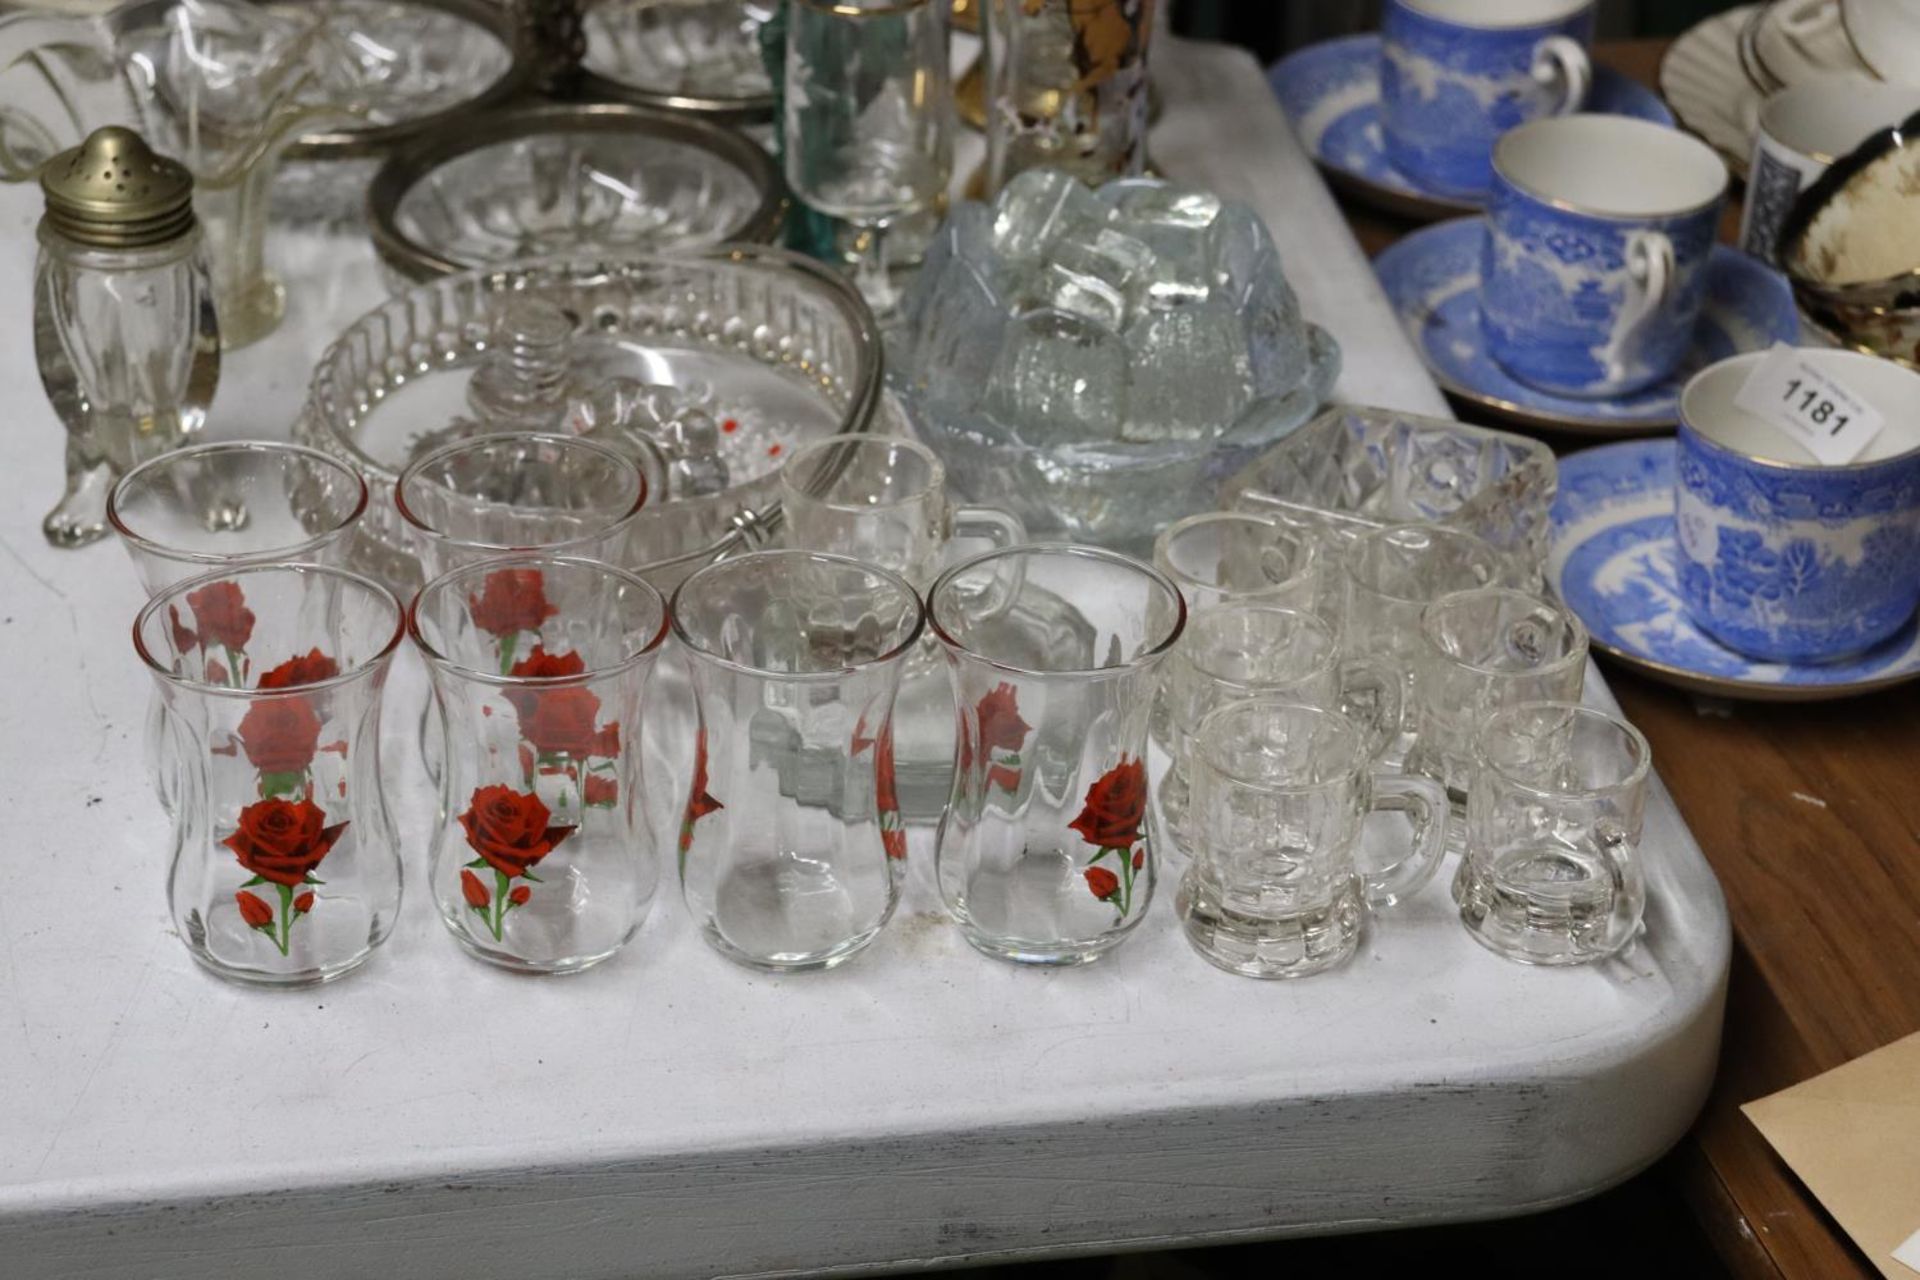 A MIXED LOT OF GLASSWARE TO INCLUDE HUNTING GLASSES, MINIATURE GLASS TANKERS, GLASS ICE CUBES ETC - Image 6 of 7